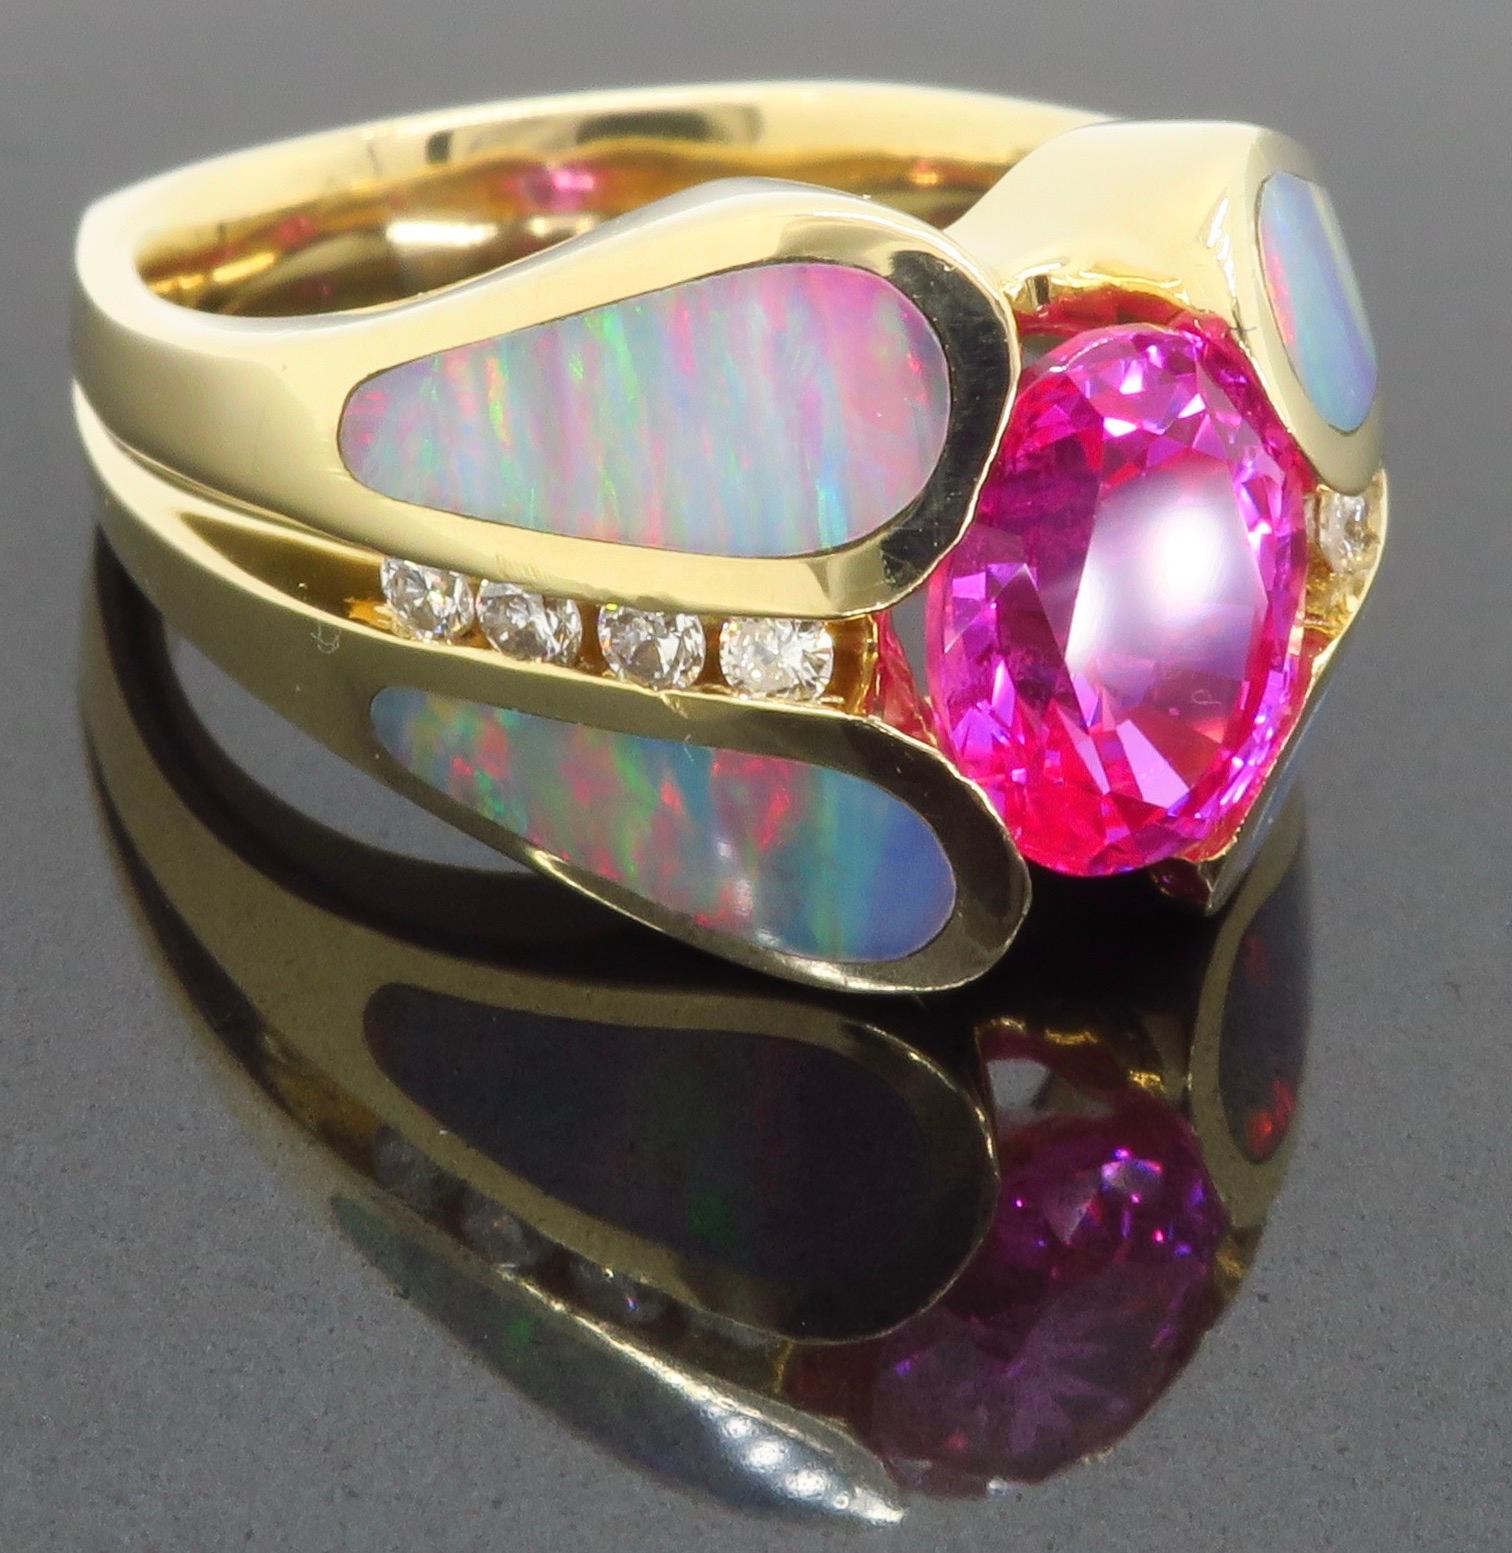 Custom Pink Sapphire, Opal, and Diamond ring made in 14k yellow gold.

Center Gemstone: Pink Sapphire 
Center Gemstone size: 8.09mm x 6.24mm 
Diamond Carat Weight: Approximately .20CTW 
Diamond Cut: Round Brilliant Cut
Metal:  14k
Marked/Tested: